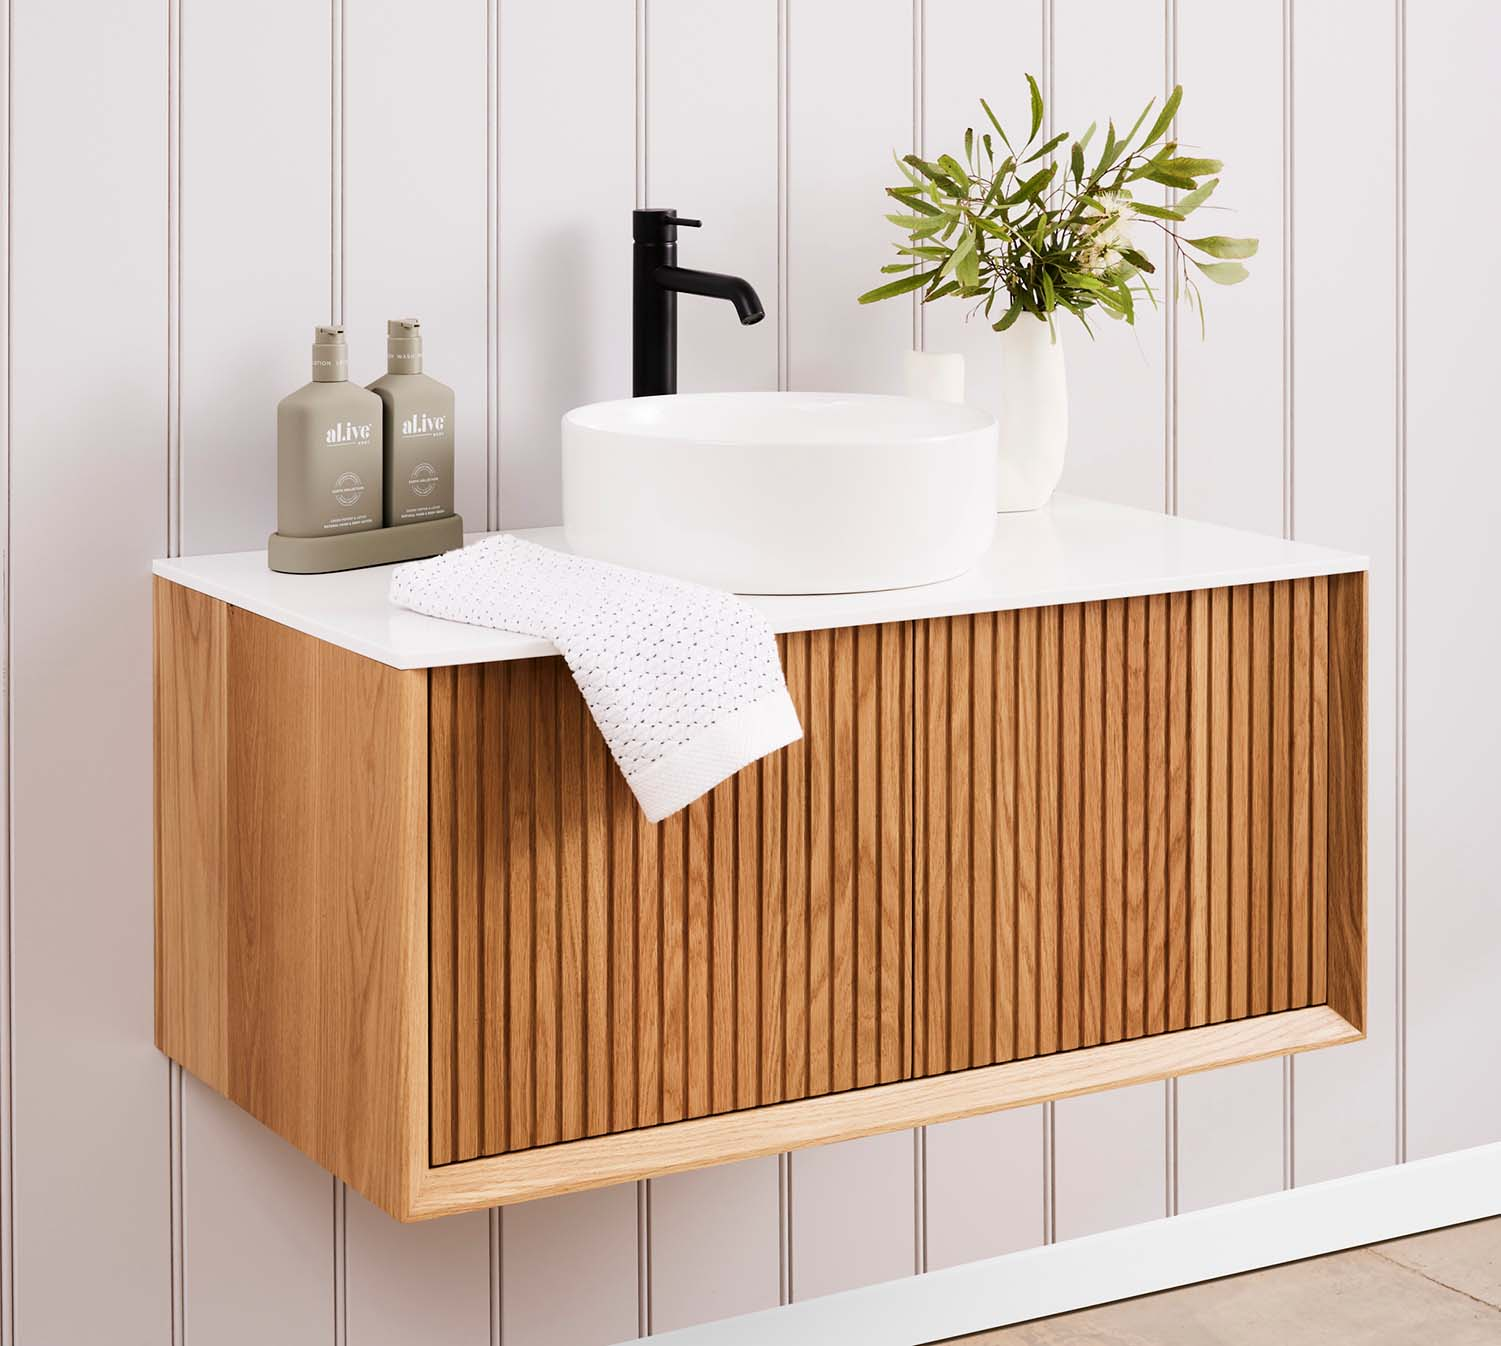 An Archer timber vanity made from American Oak, with a glacier white corian top